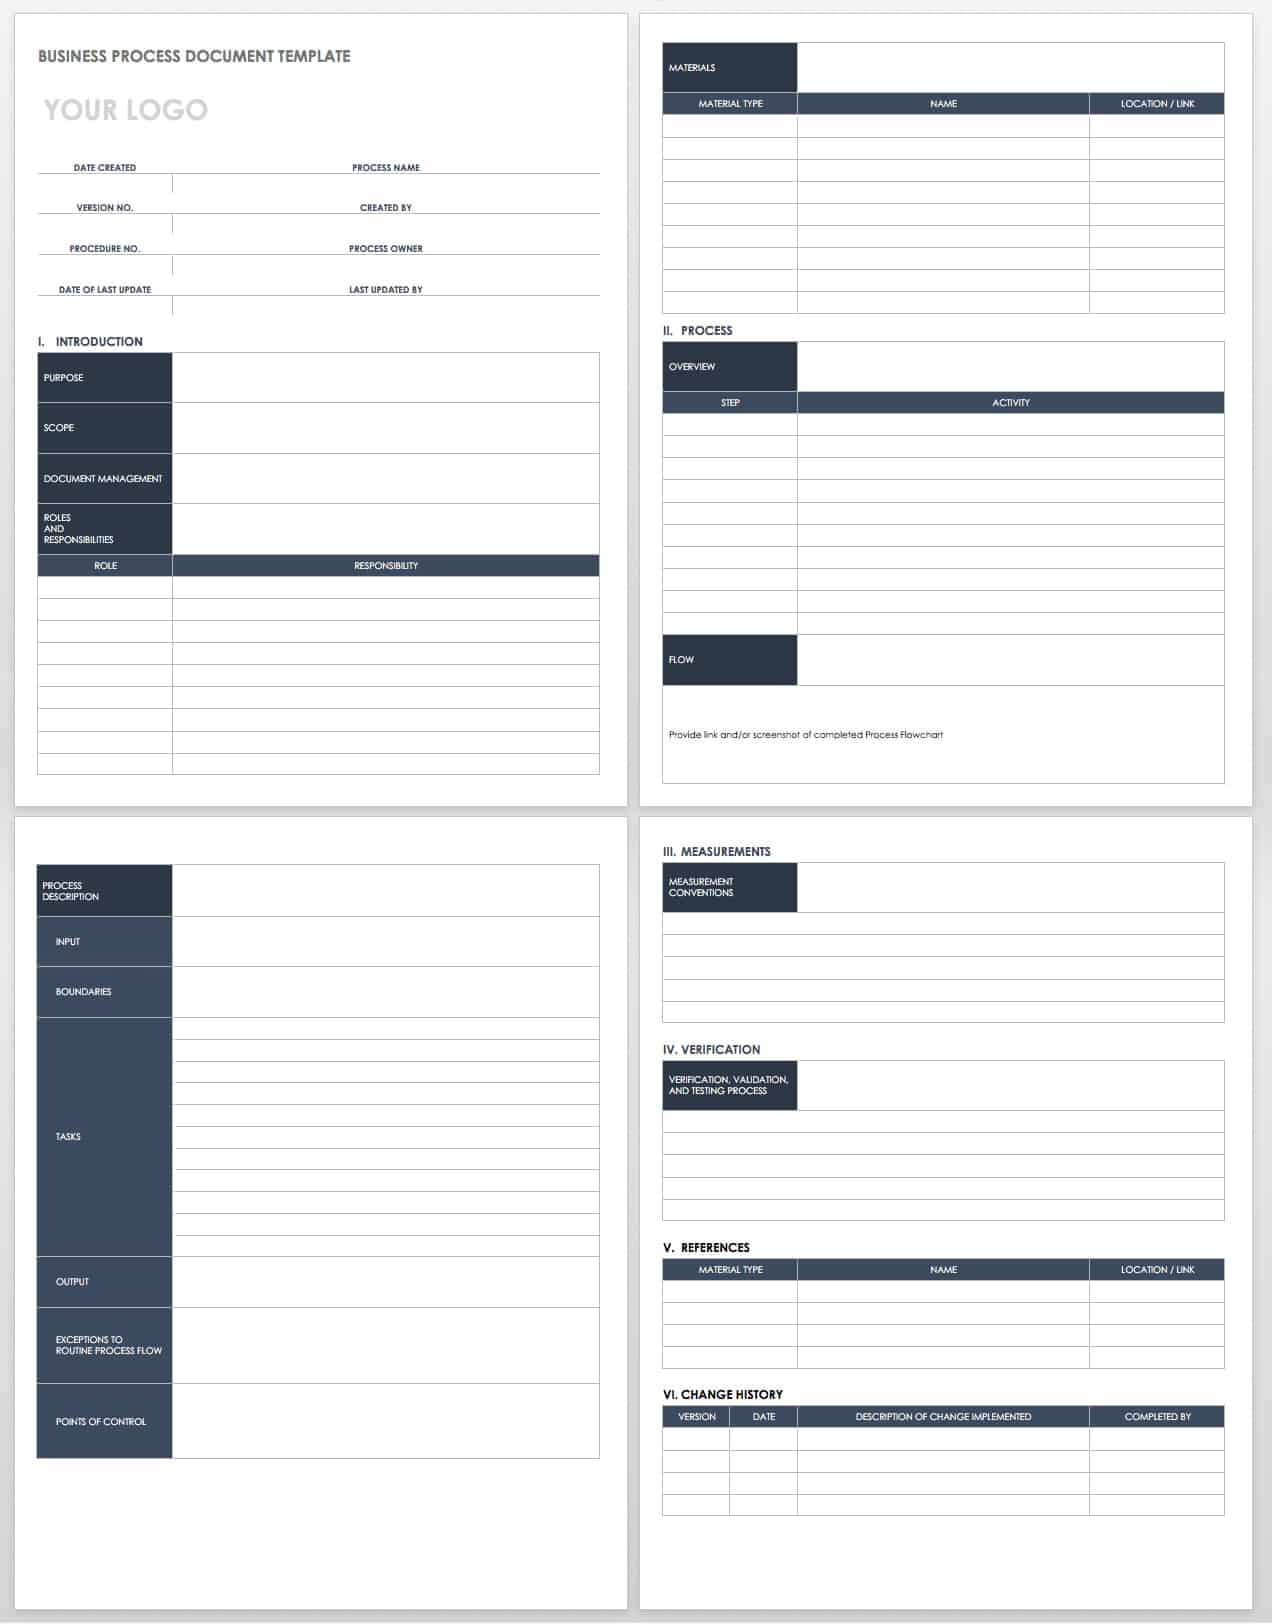 Free Process Document Templates | Smartsheet Pertaining To Business Process Documentation Template